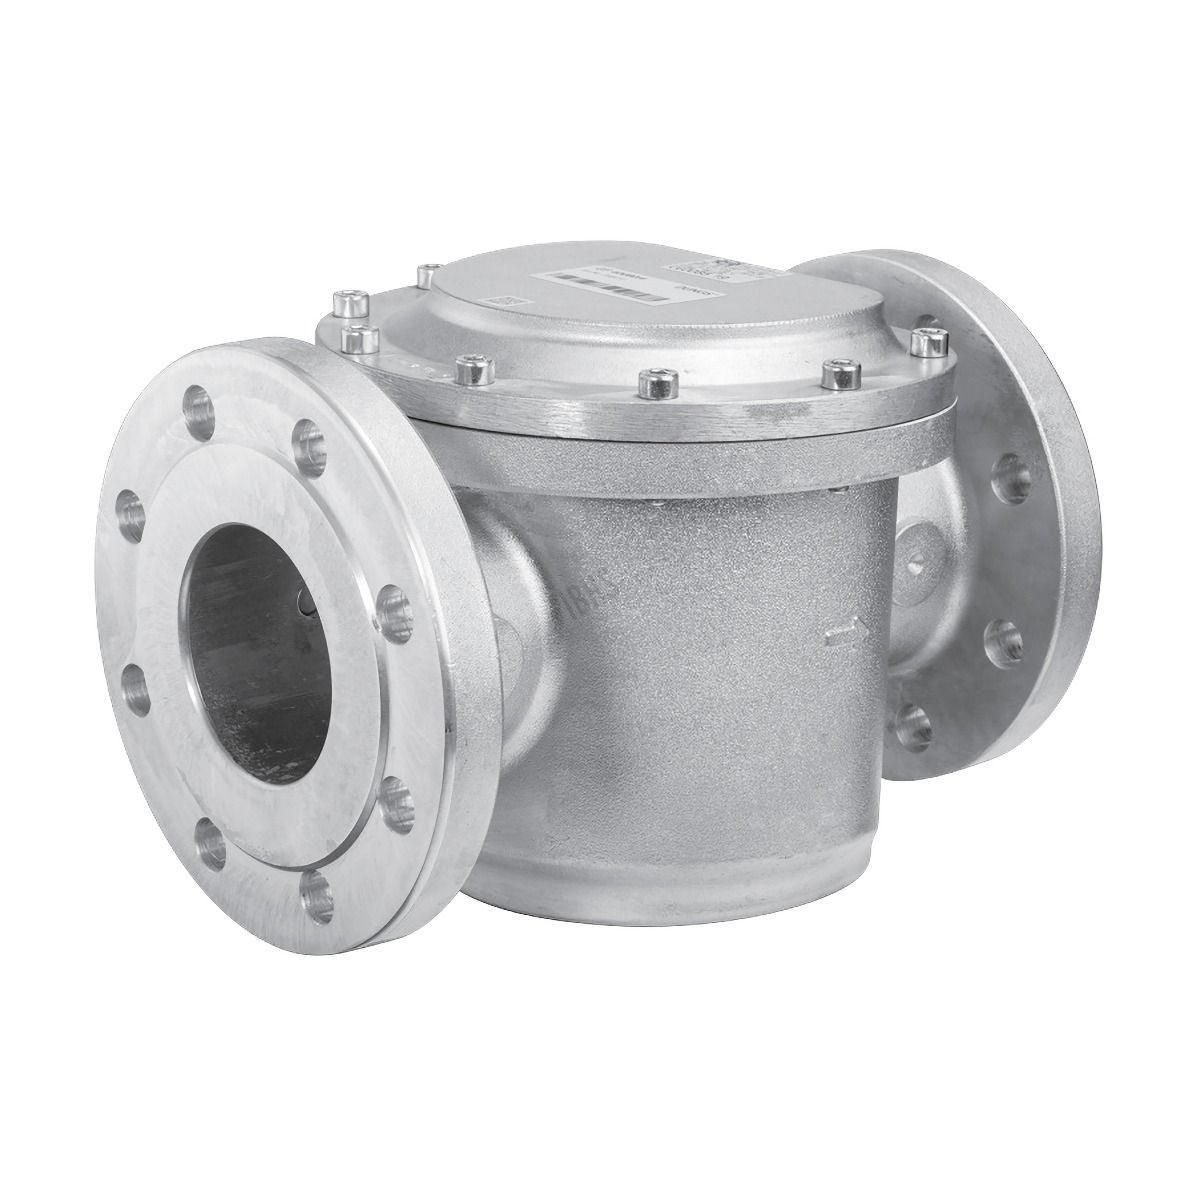 40mm Flanged PN16 Gas Filter 6 Bar Max Operating Pressure